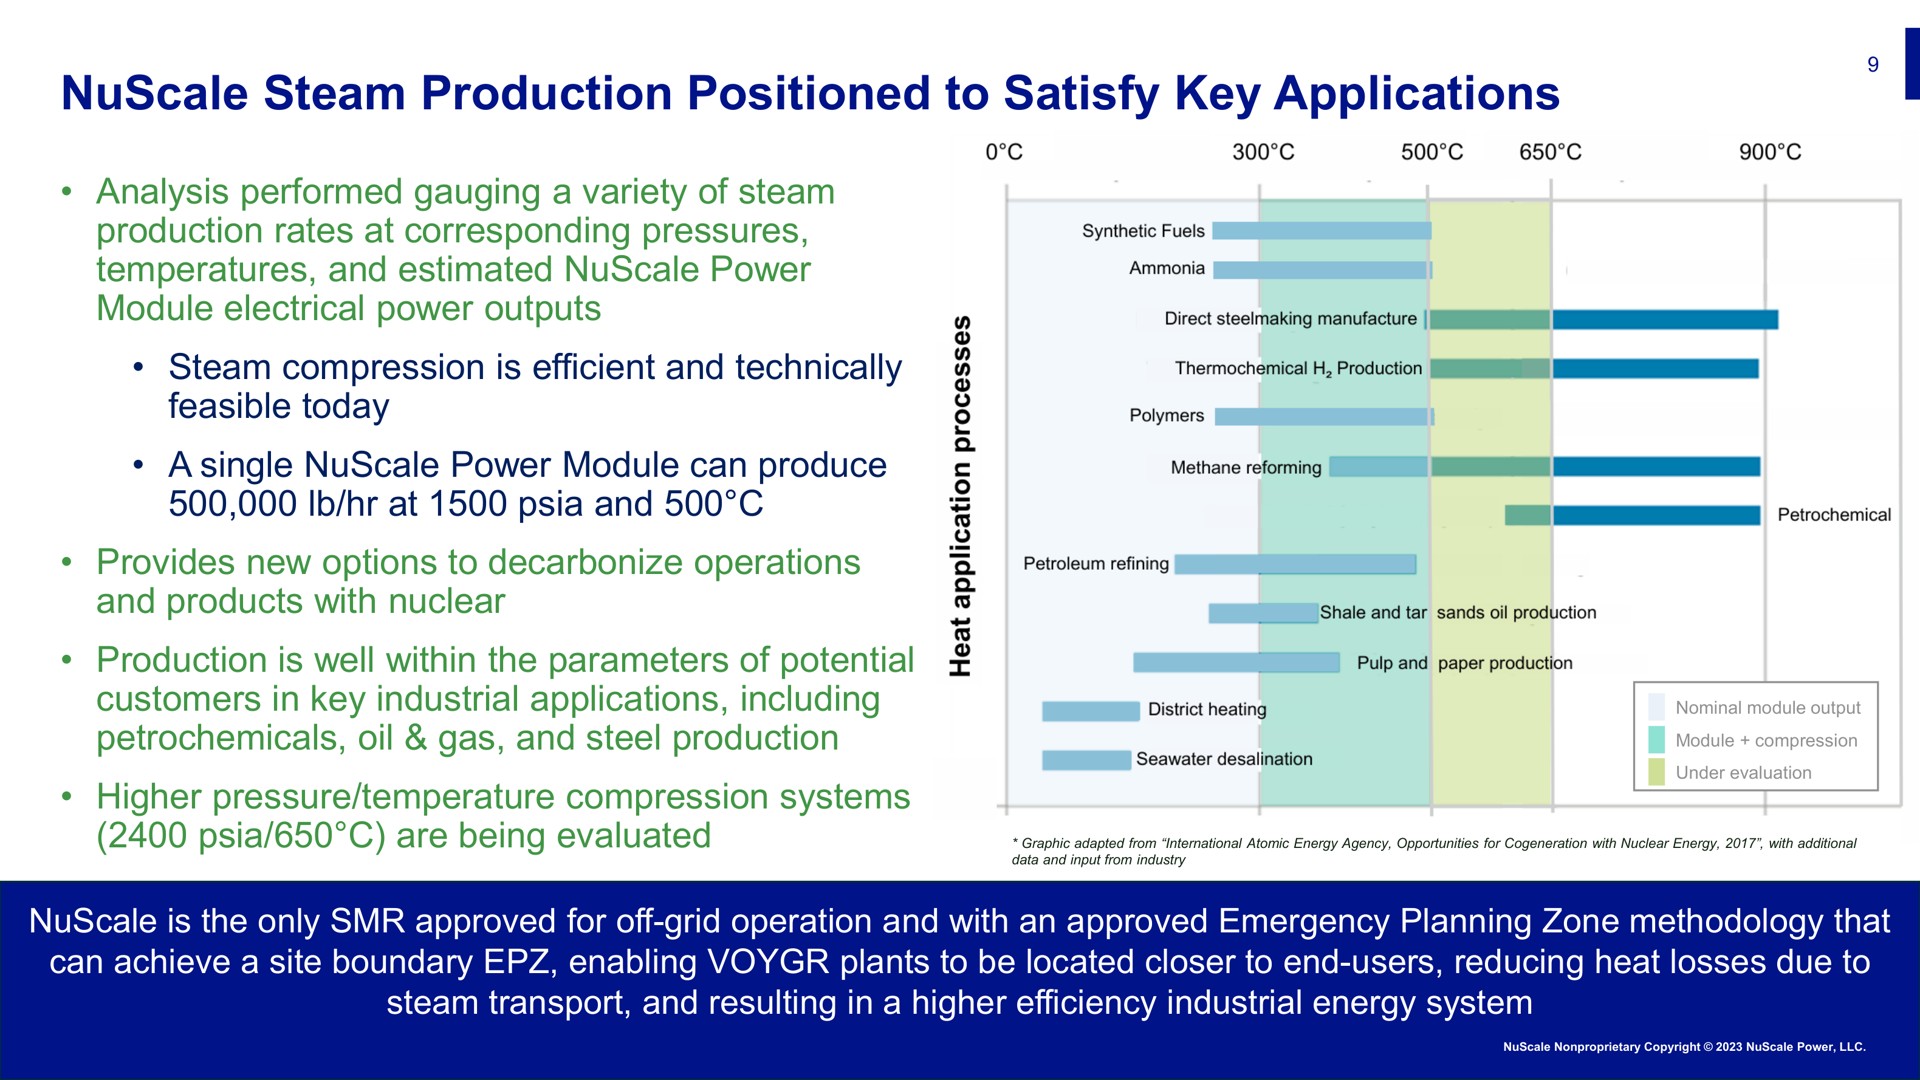 steam production positioned to satisfy key applications at and | Nuscale